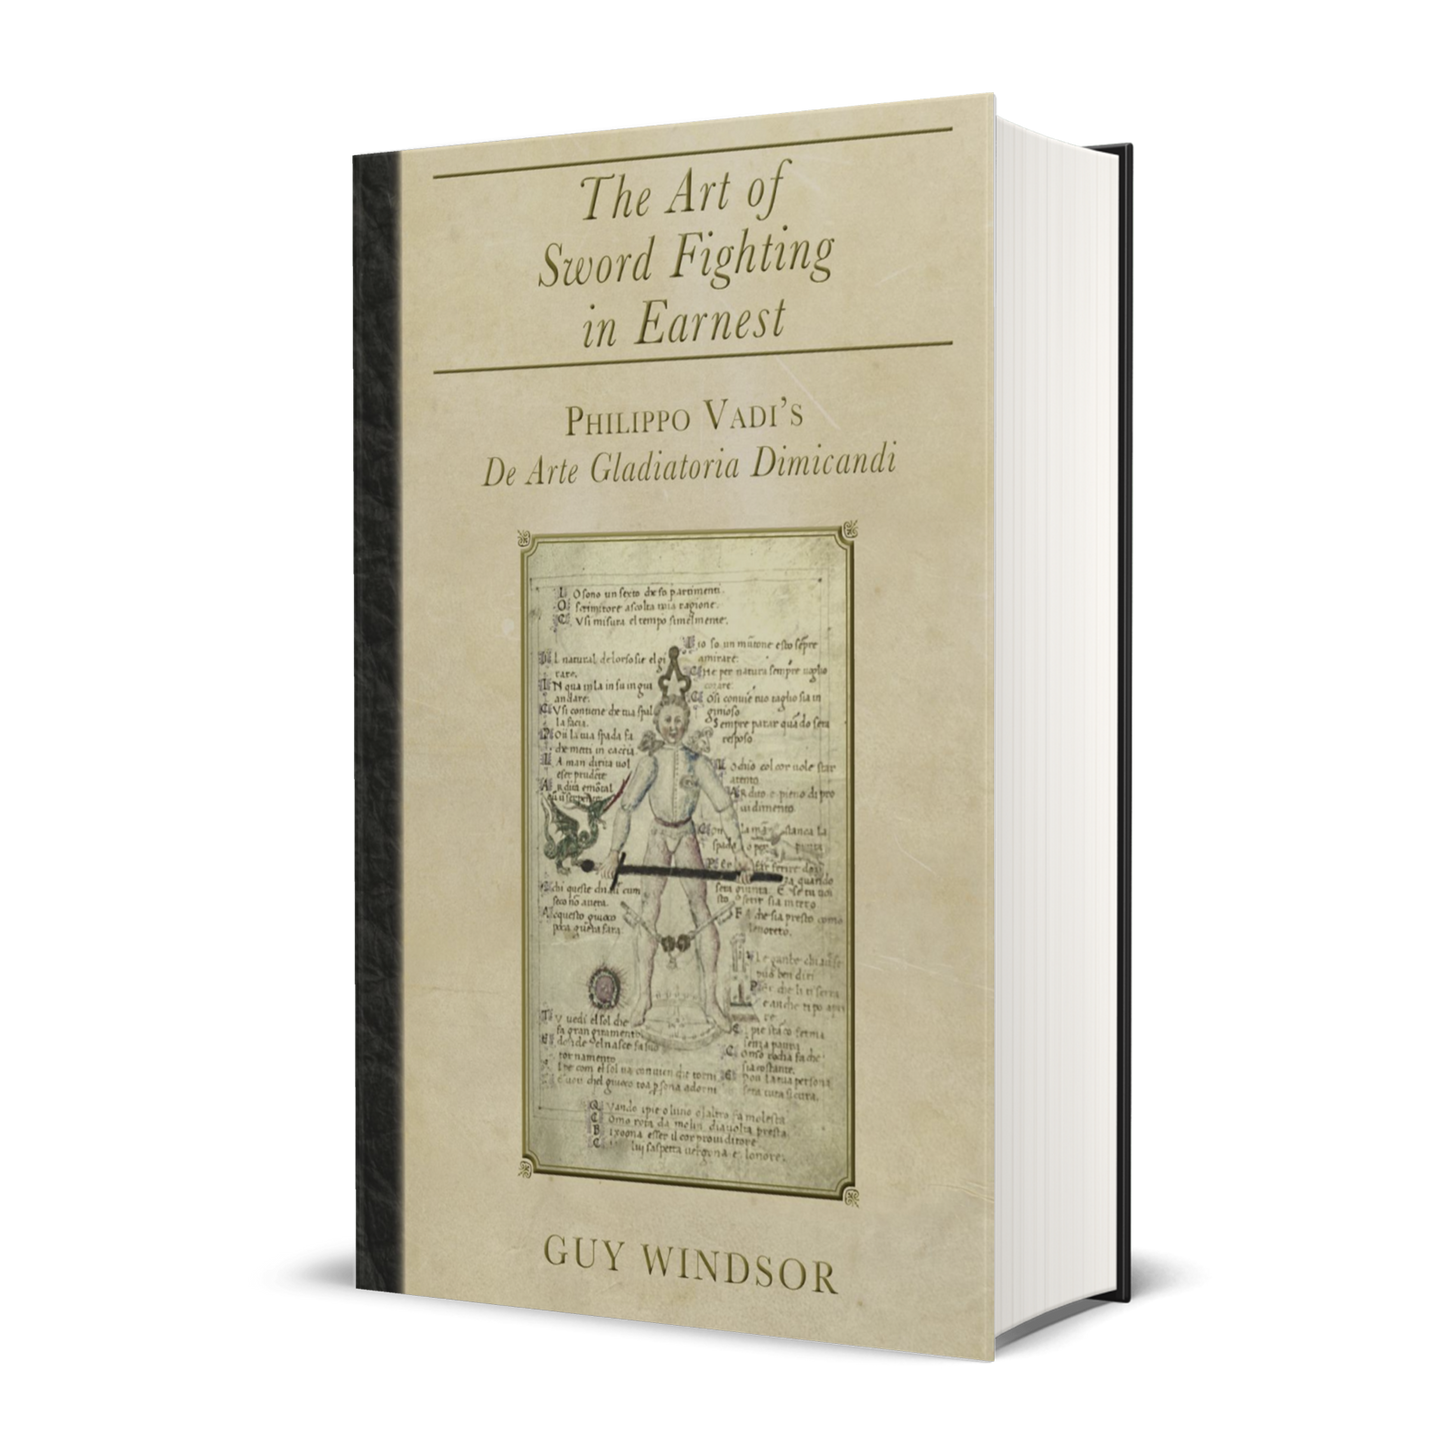 The Art of Sword Fighting in Earnest: Philippo Vadi's De Arte Gladiatoria Dimicandi with an Introduction, Translation, Commentary, and Glossary (hardback)